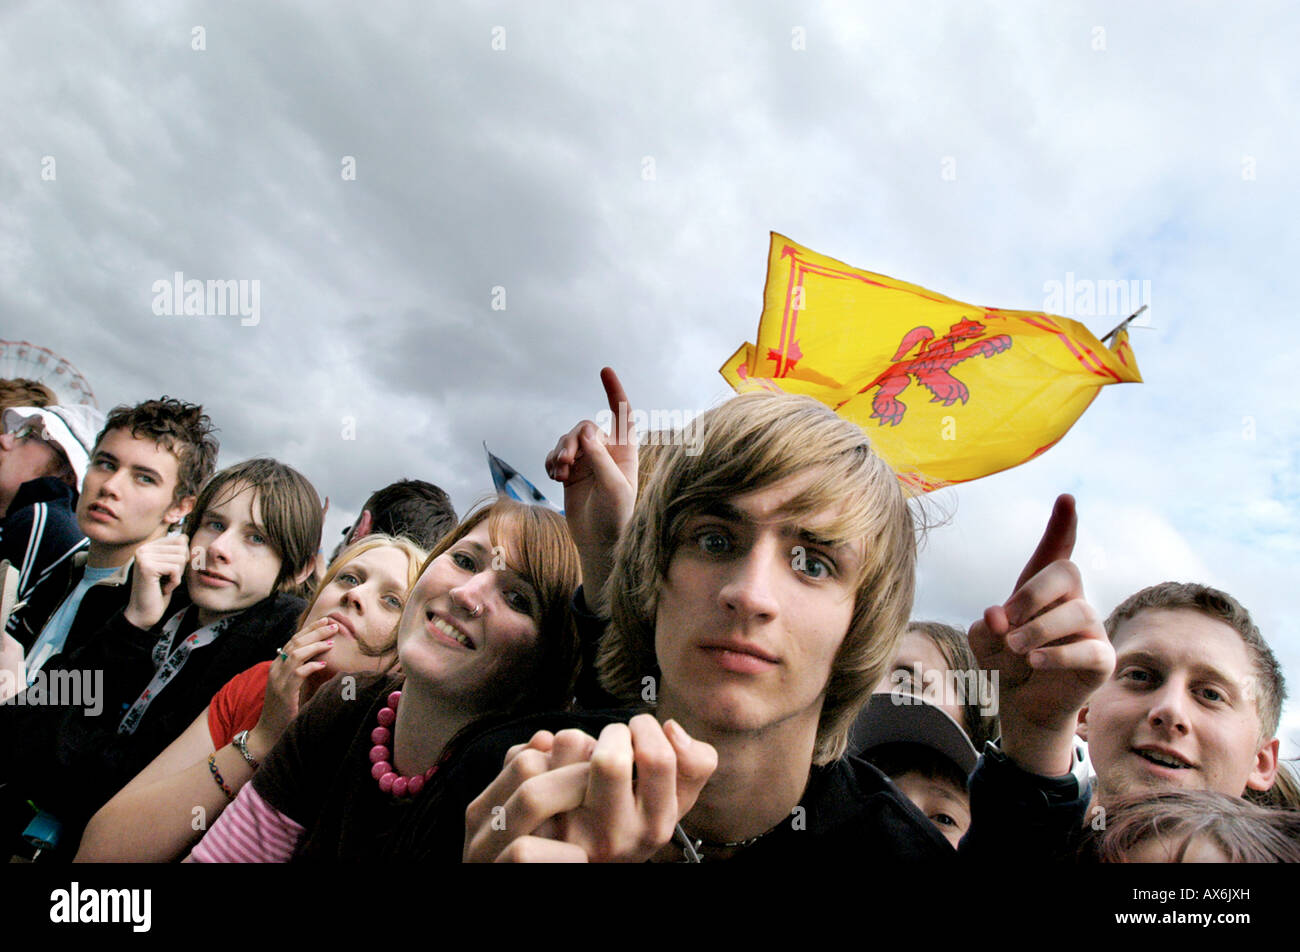 Crowd of teenagers at Music Festival Stock Photo